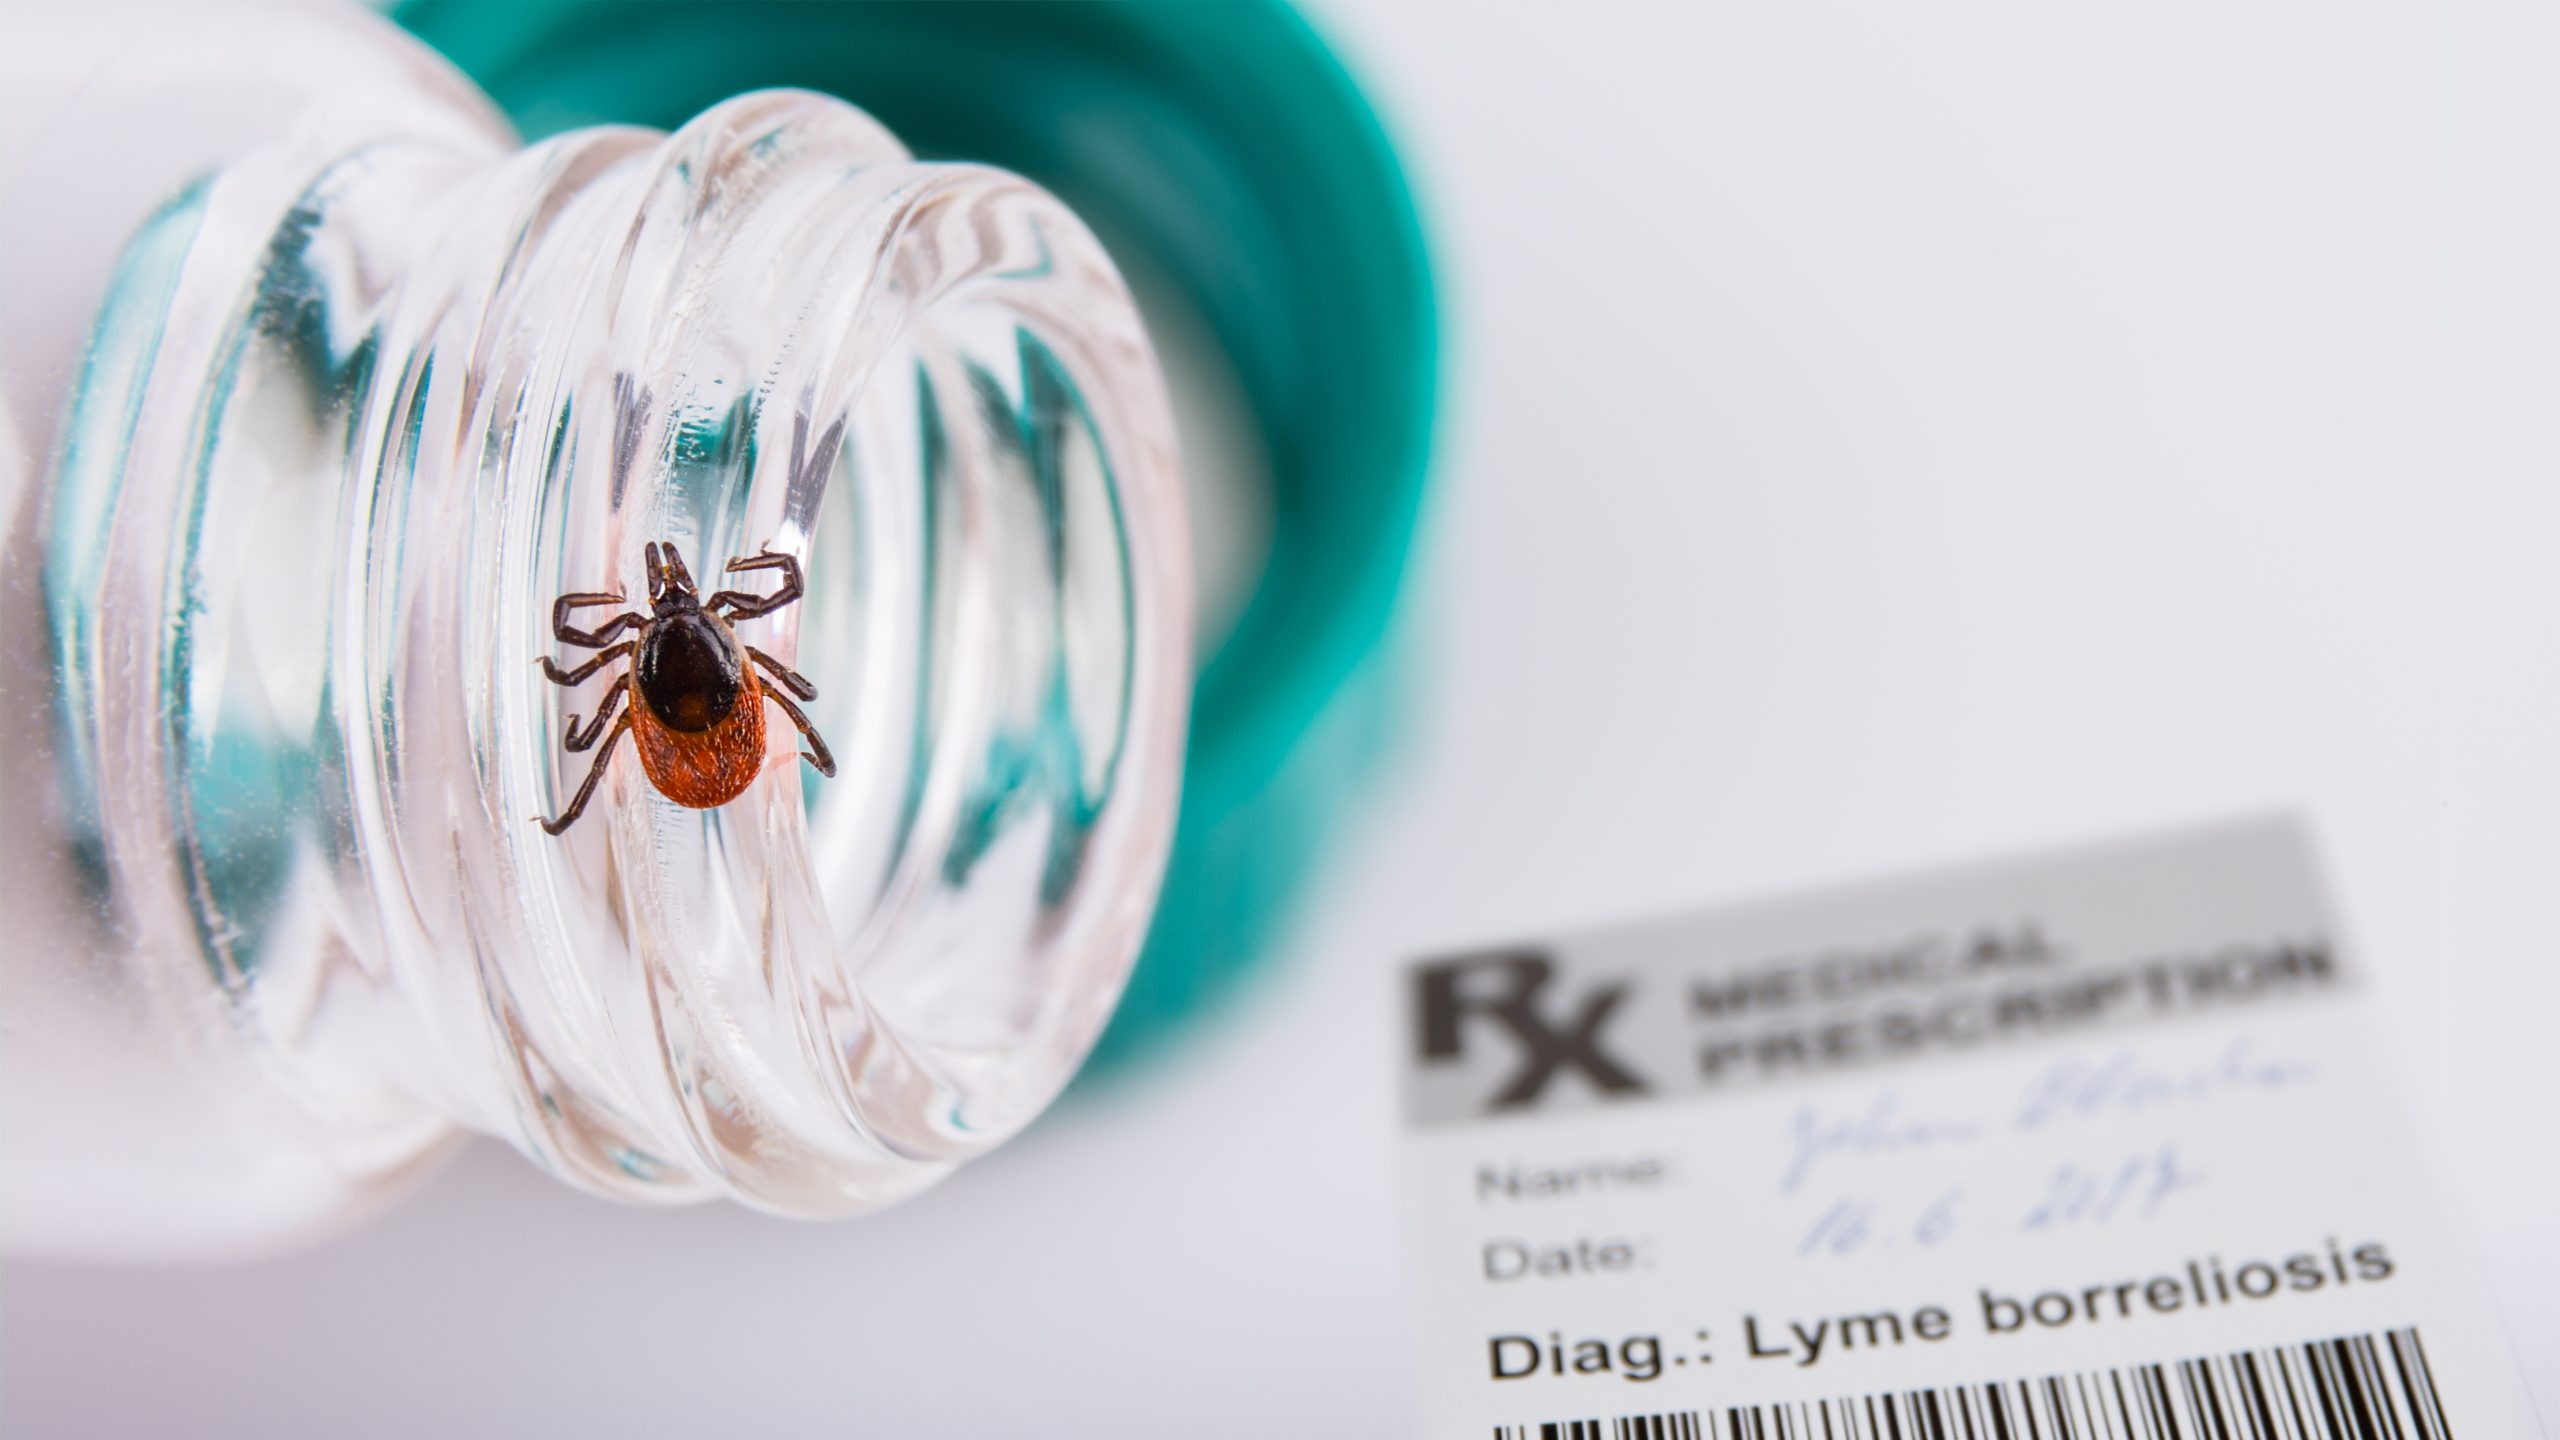 tick crawling on vial with sign lyme disease